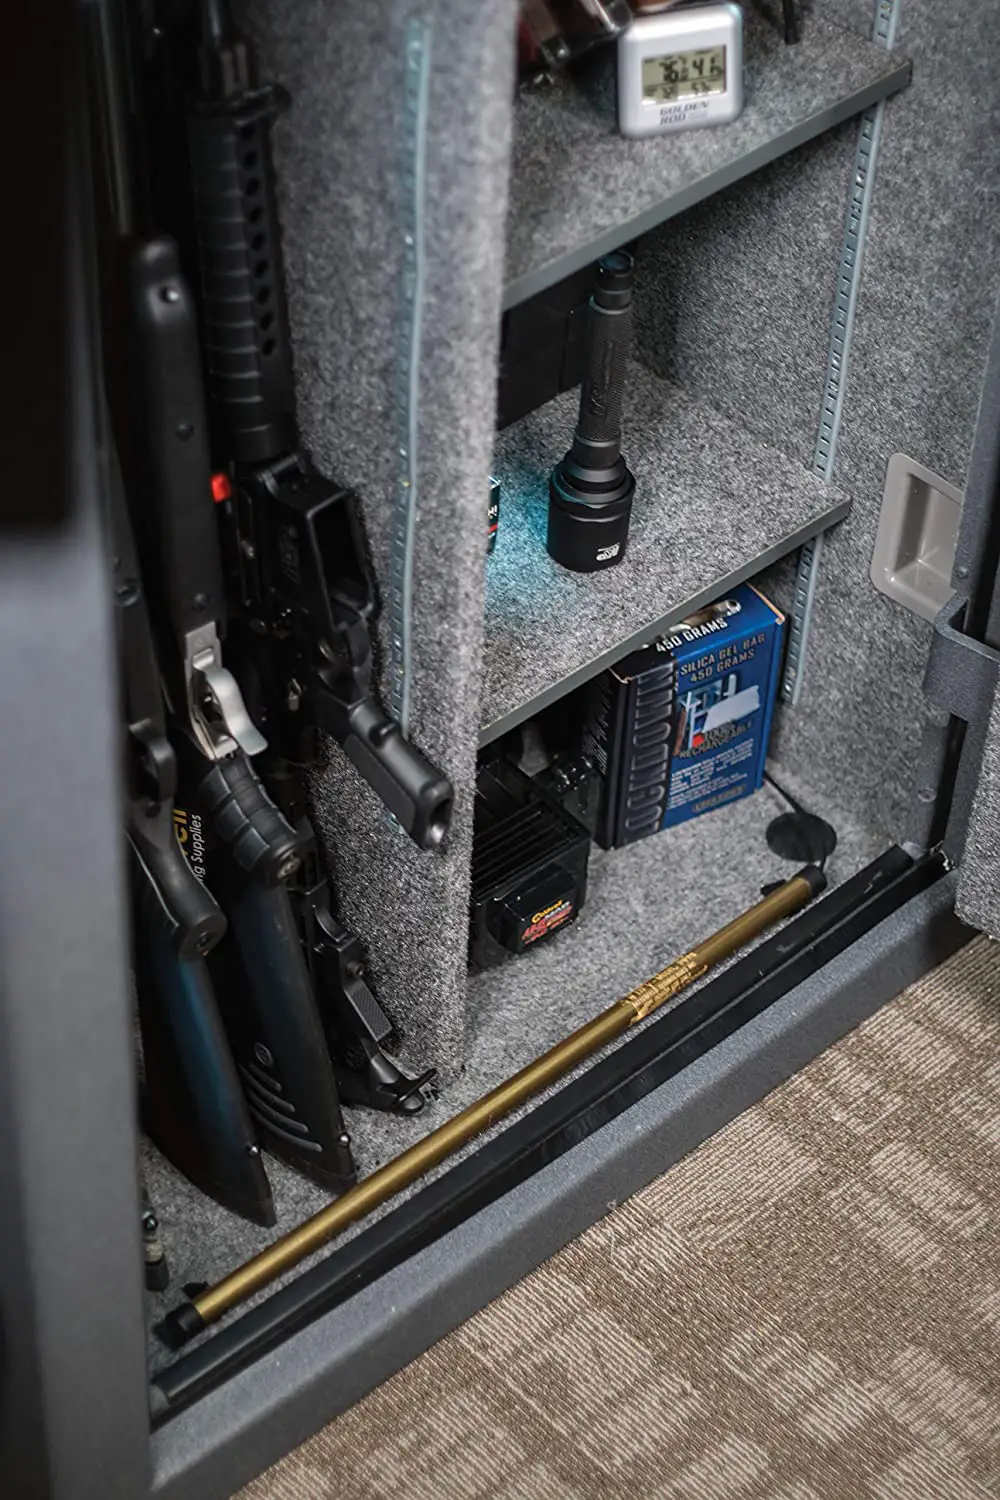 How to install a dehumidifier in your gun safe